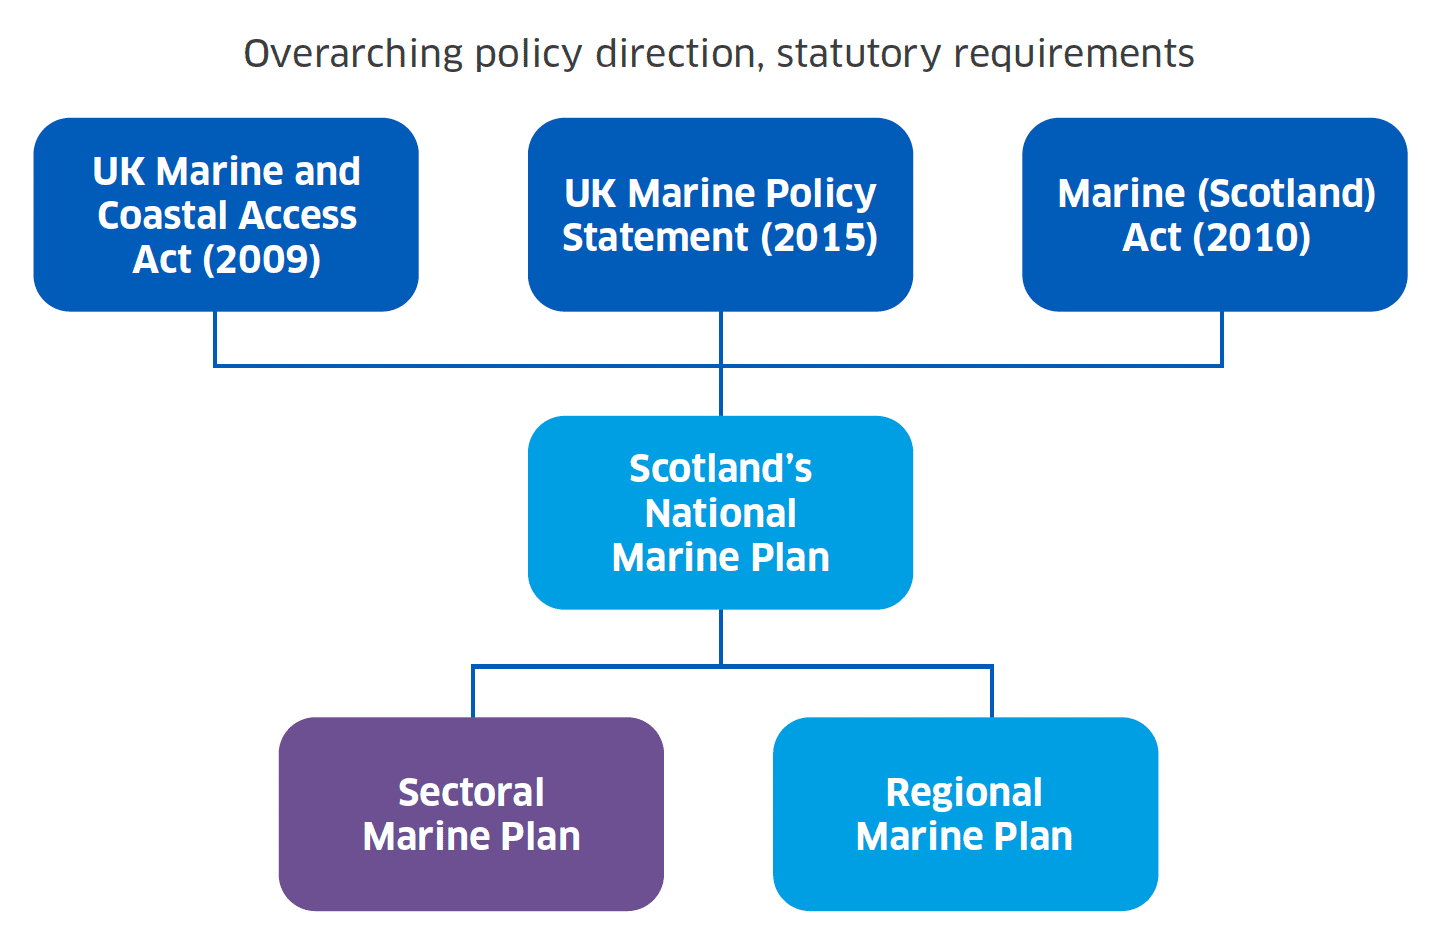 Diagram of the marine planning process in Scotland. The UK Marine and Coastal Access Act (2009), Marine (Scotland) Act (2010), and UK Marine Policy Statement (2015) provide the overarching policy direction and statutory requirements for Scotland’s National Marine Plan. Regional and sectoral marine plans must be in compliance with the National Marine Plan. The National Marine Plan and Regional Marine Plans are statutory. 